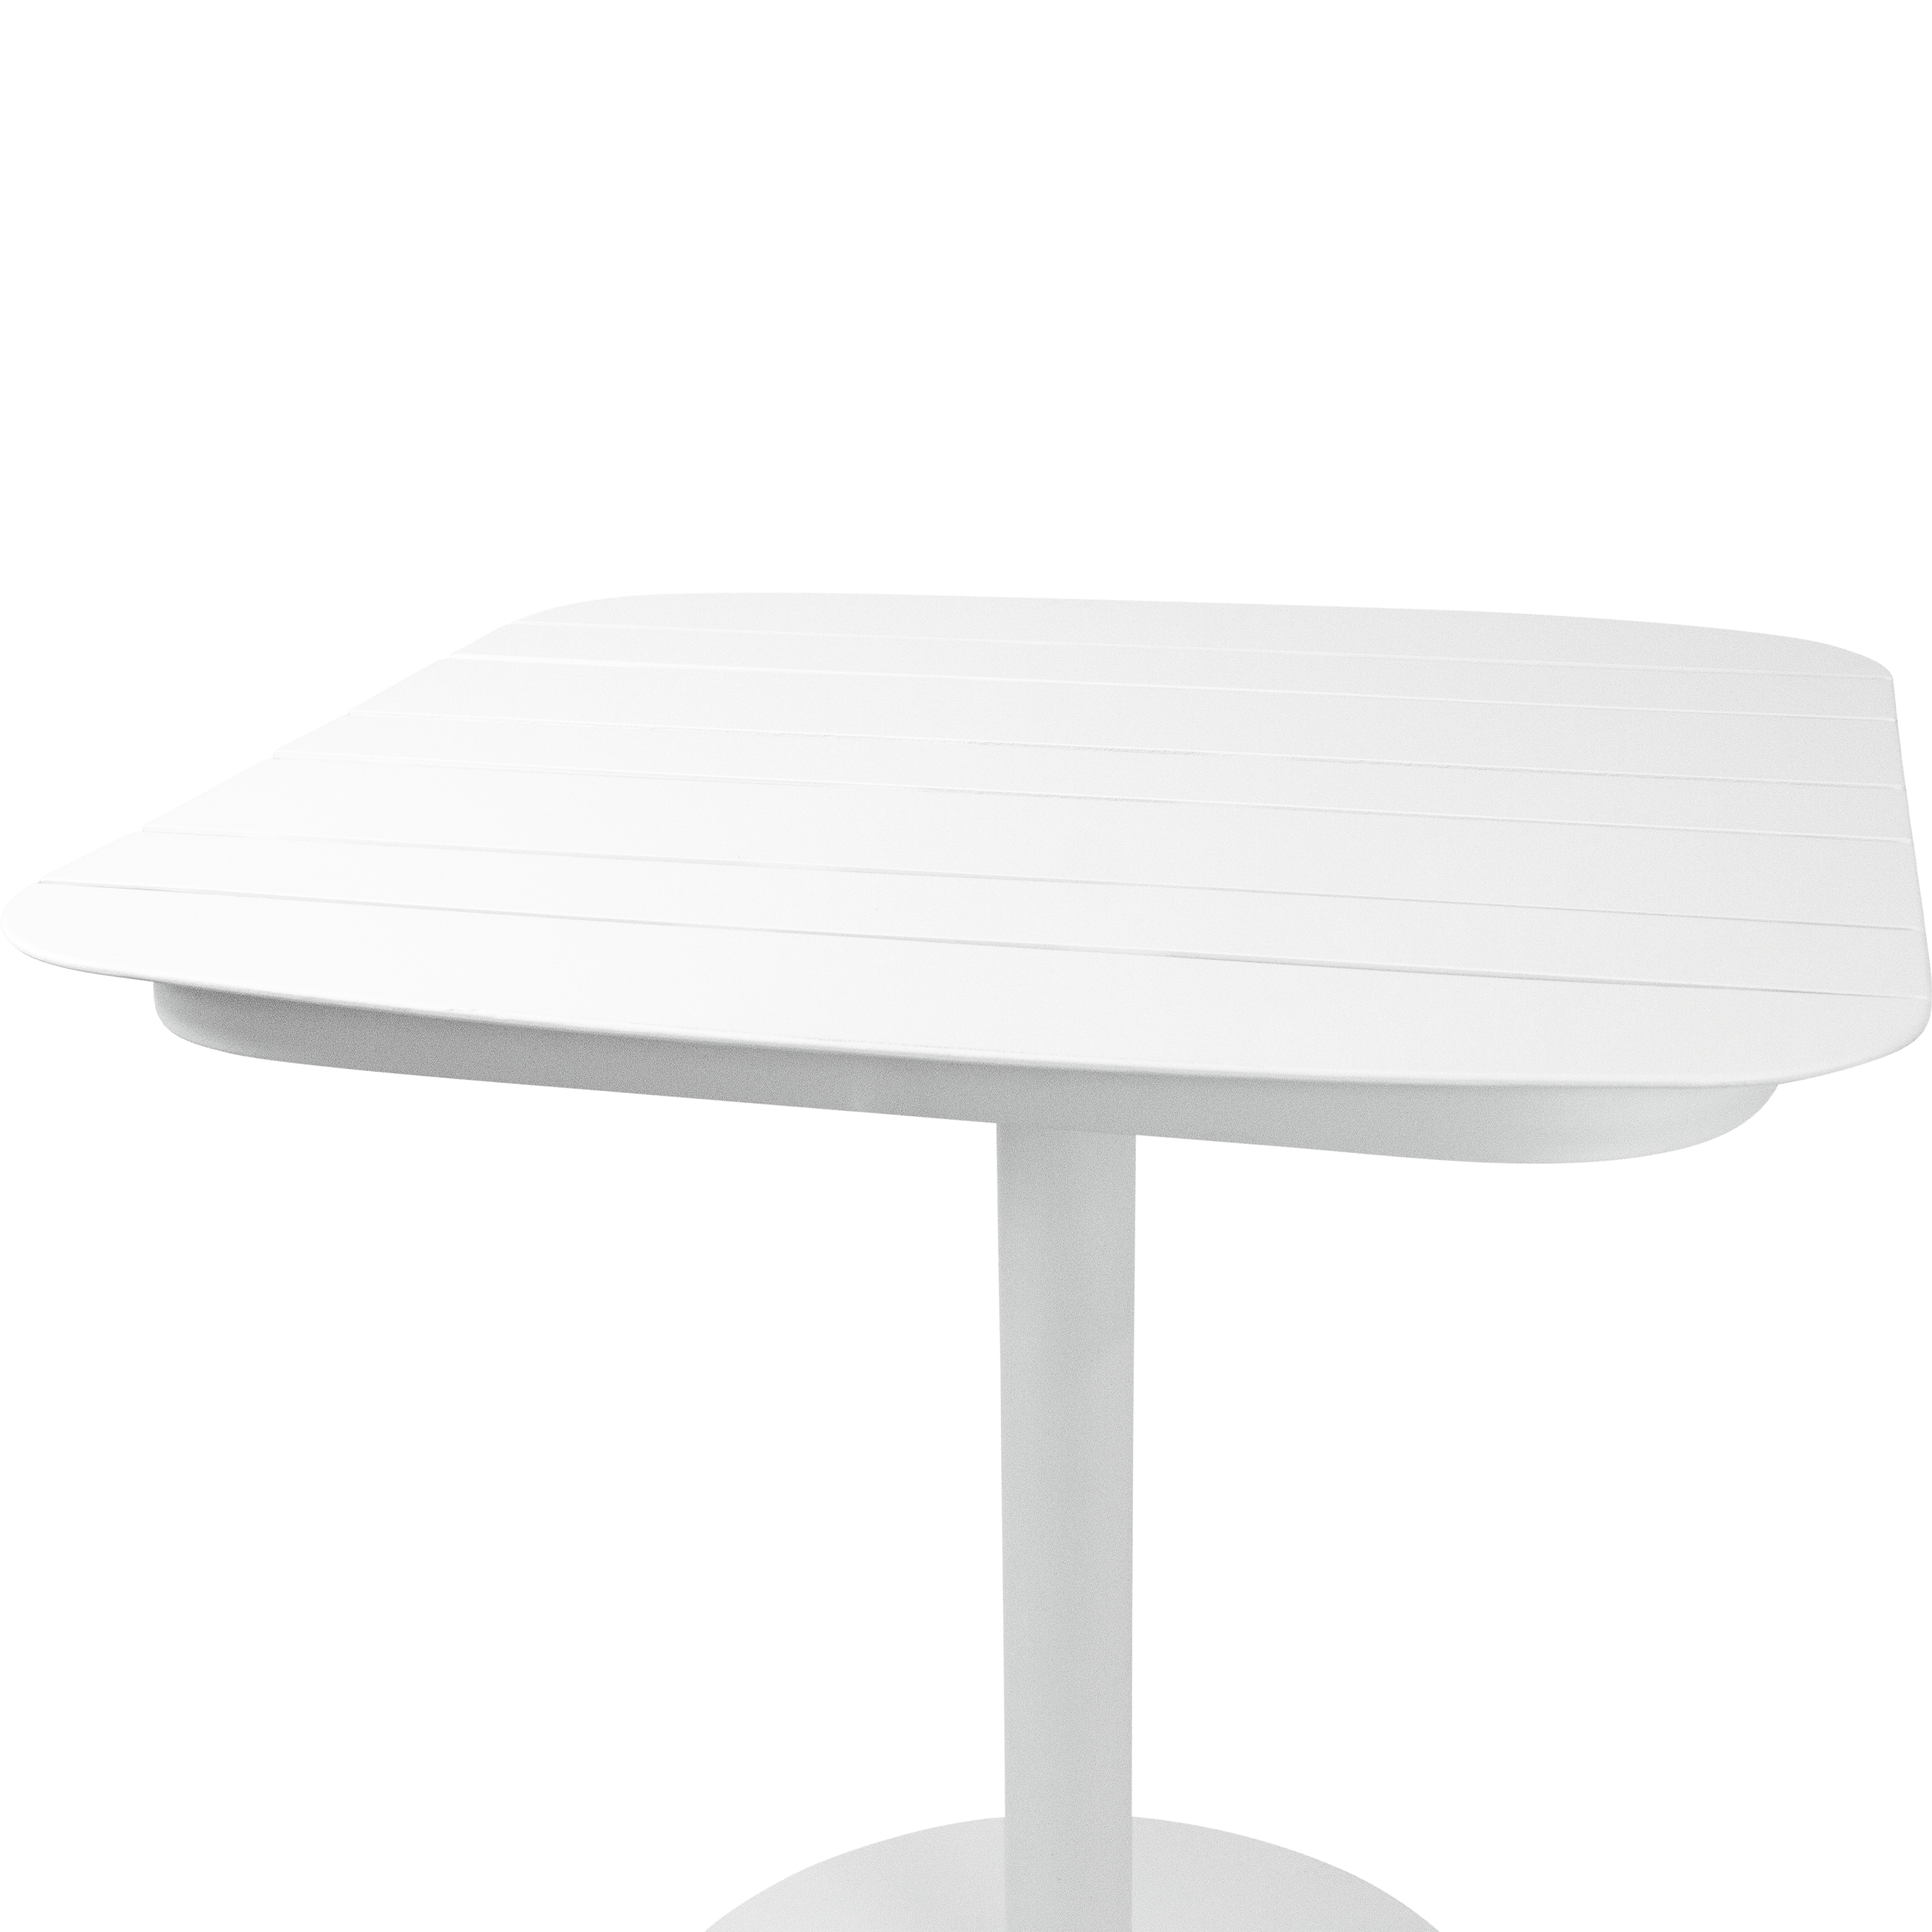 Cafe Collection Square Dining Table in Aluminium and Steel Base in Arctic White